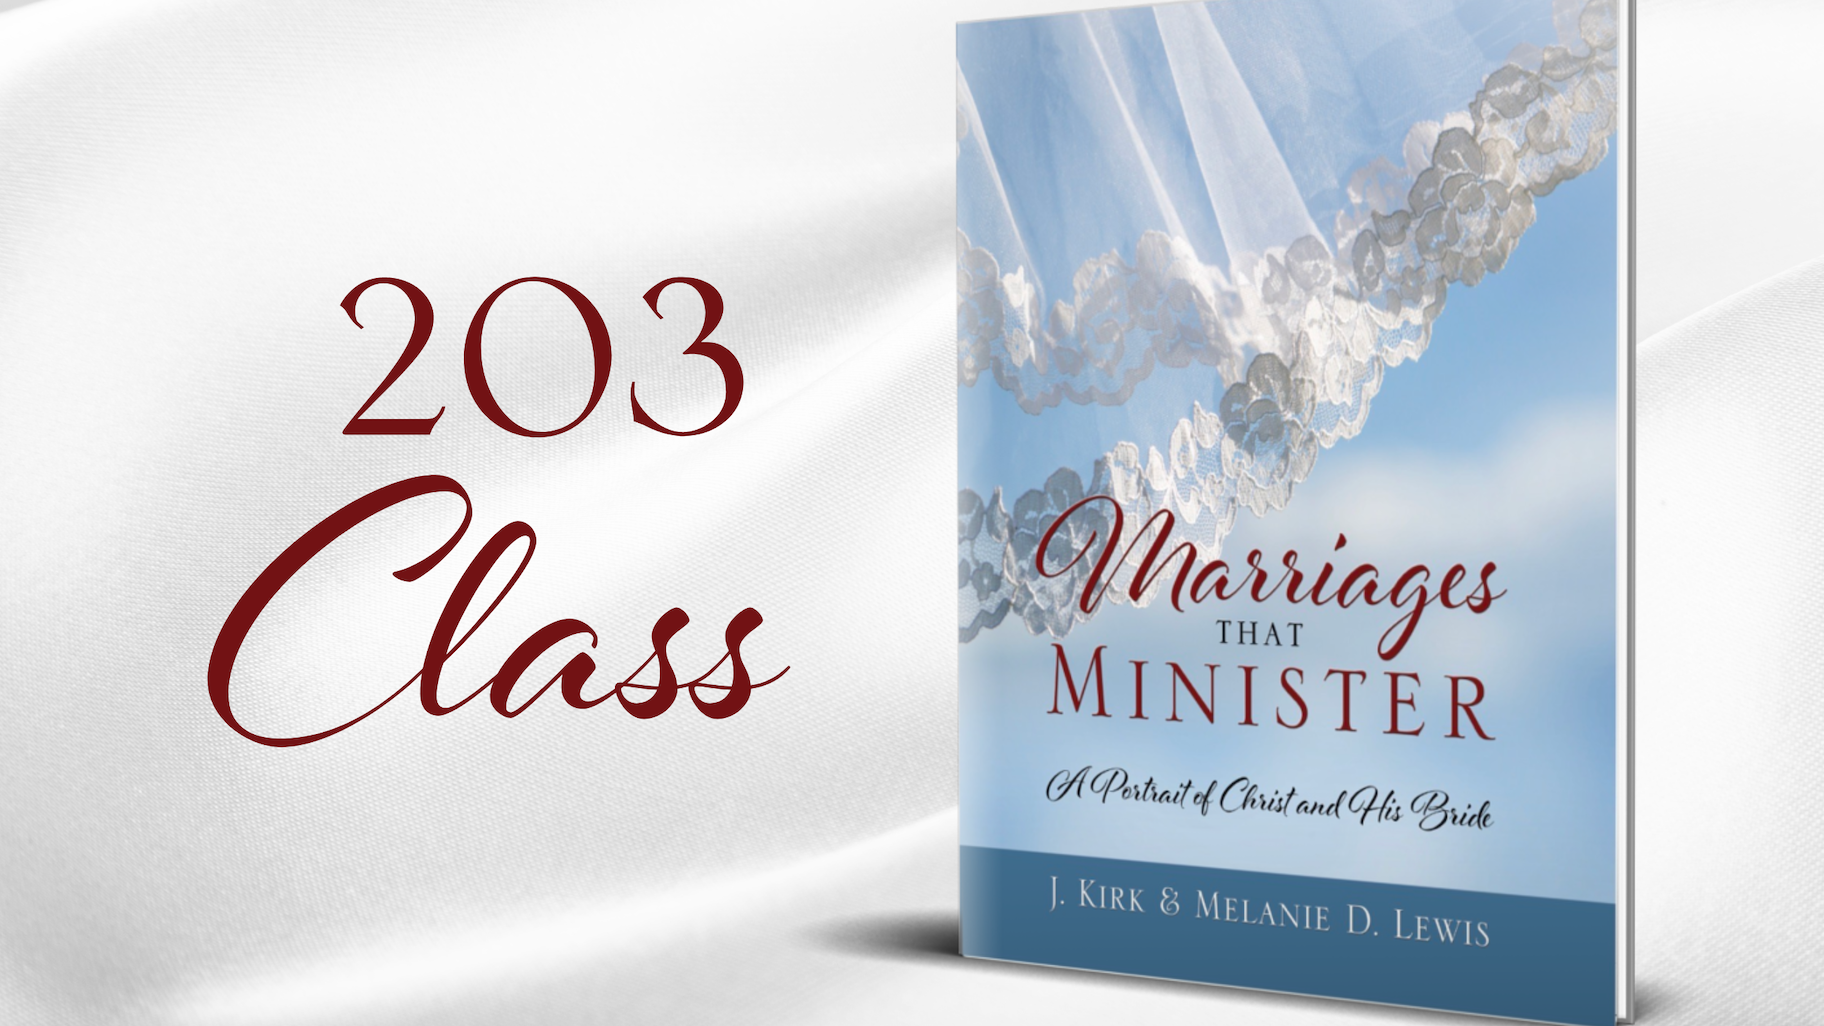 Marriages that Minister Class 203